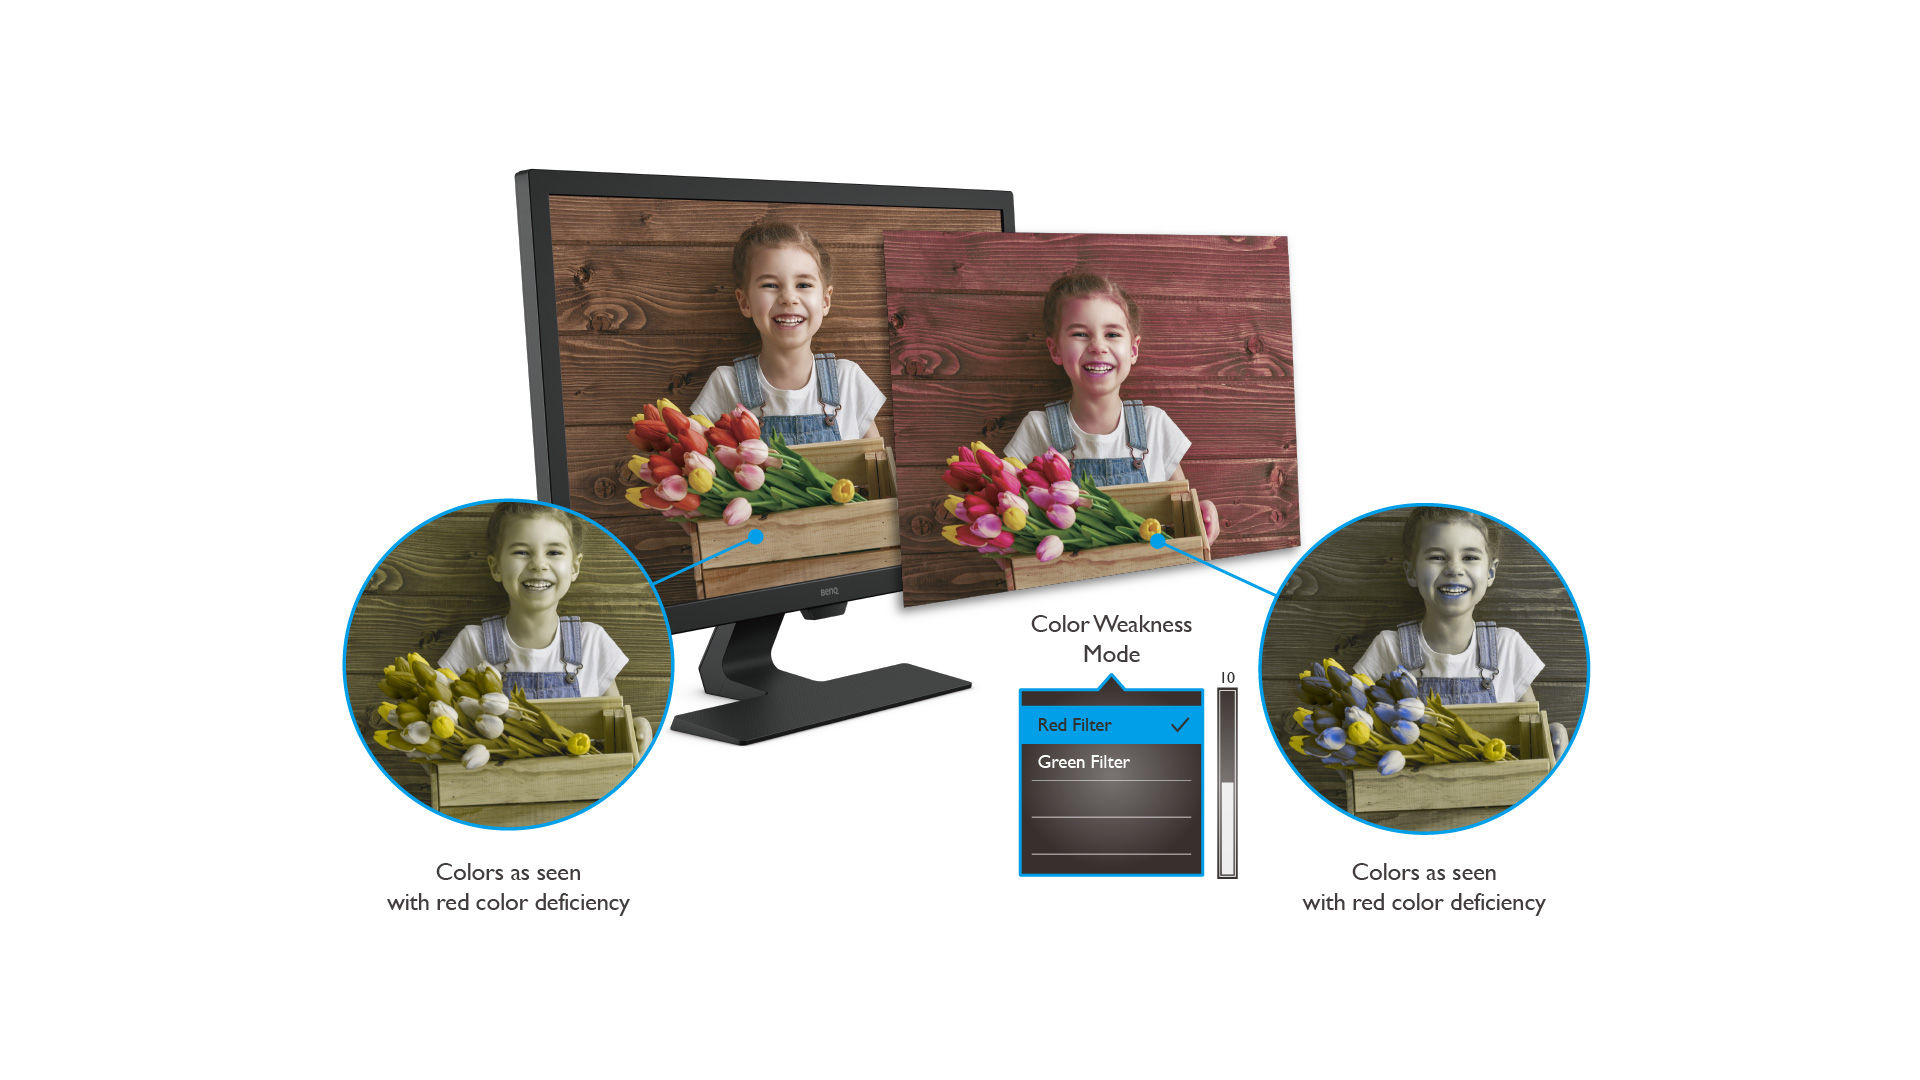 benq gw2780 has colour weakness mode with red and green filters, helping individuals with common types of colour vision deficiency distinguish colours more easily